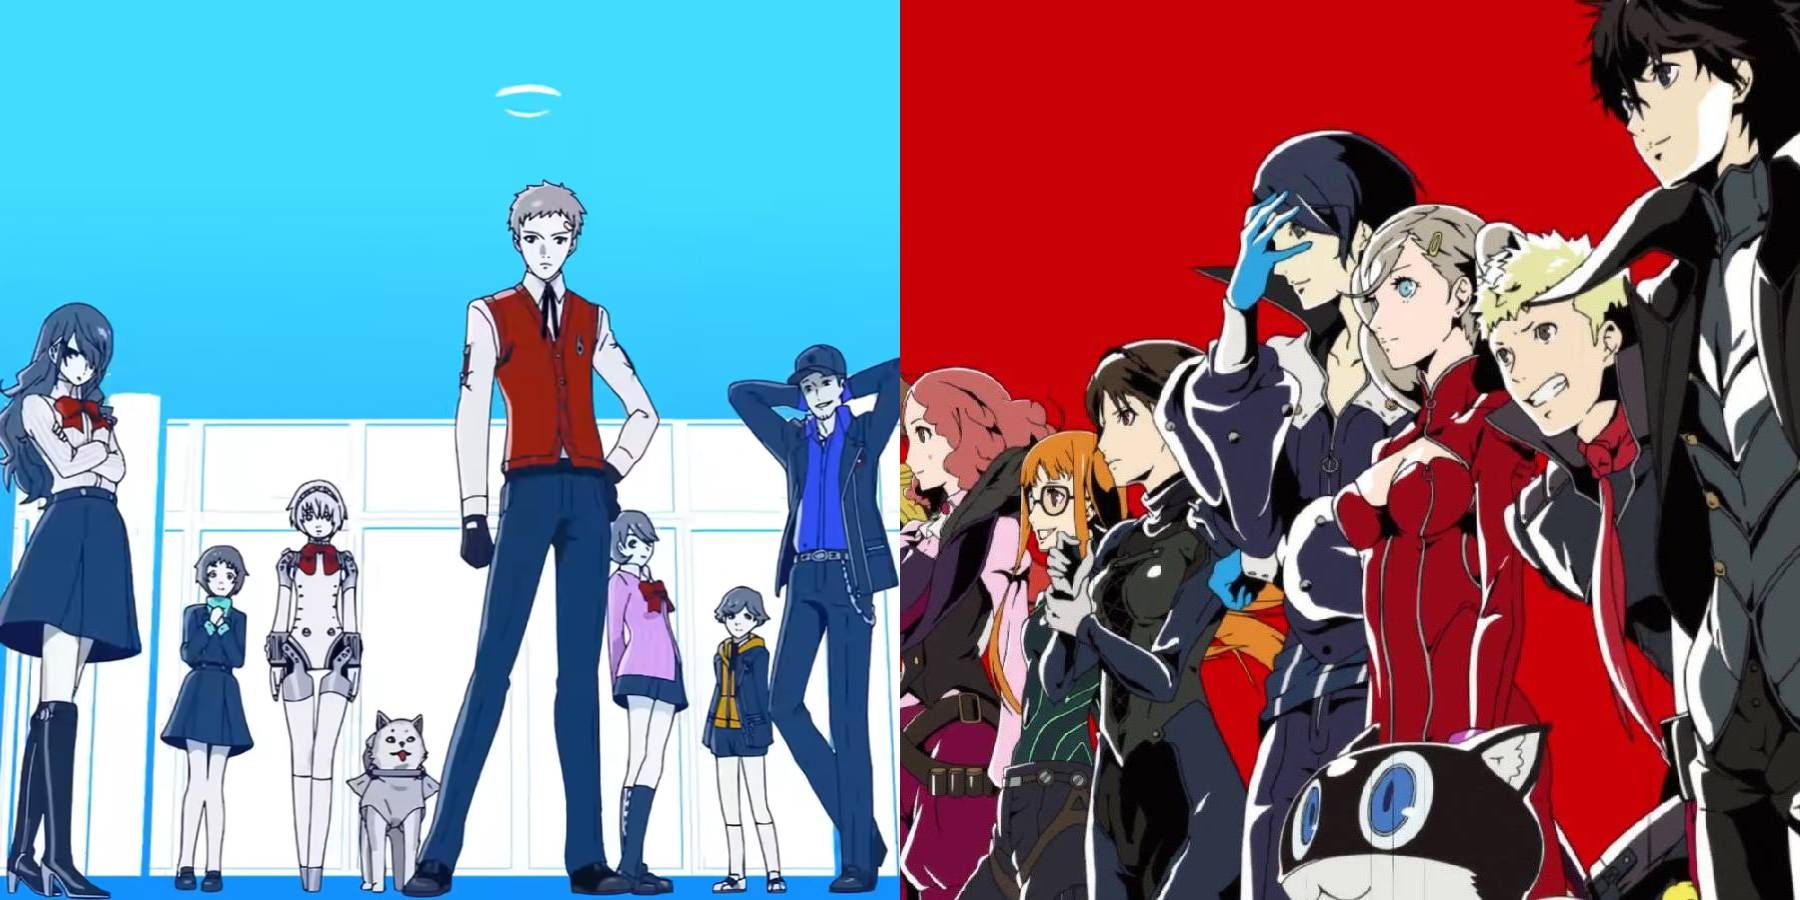 The party members from Persona 3 Reload and Persona 5